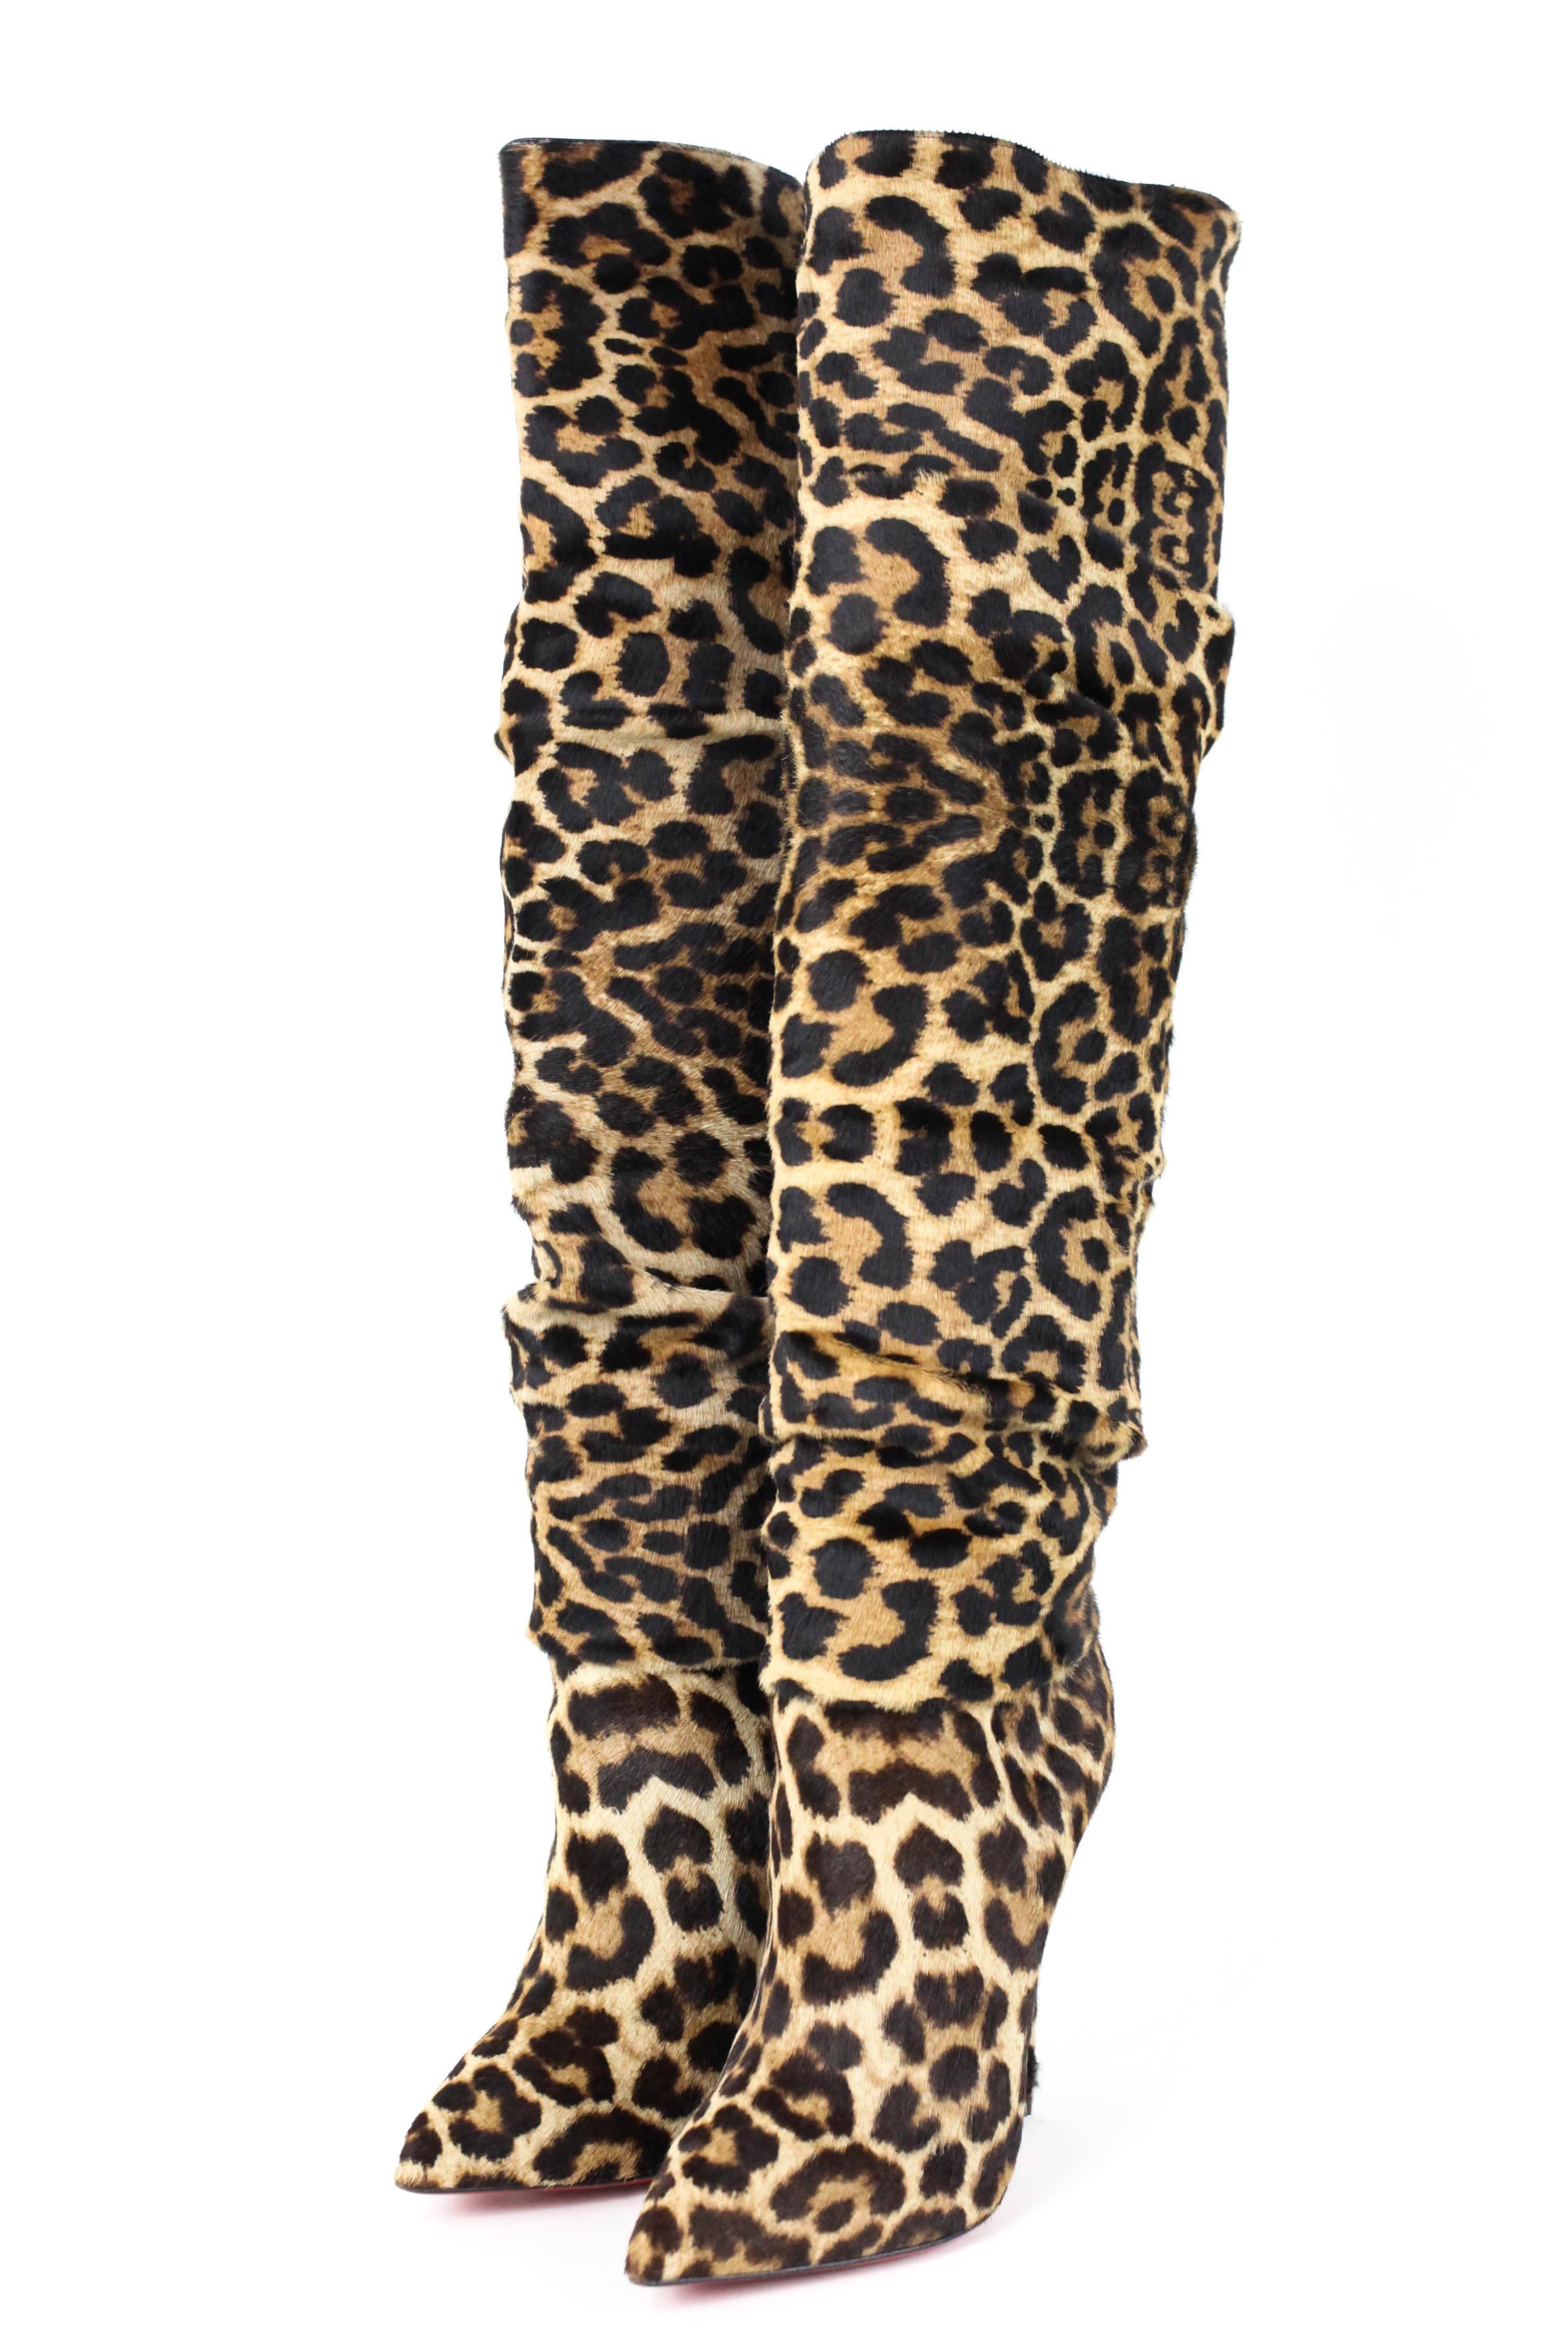 Black CHRISTIAN LOUBOUTIN Leopard Knee High Boots 36.5 For Sale